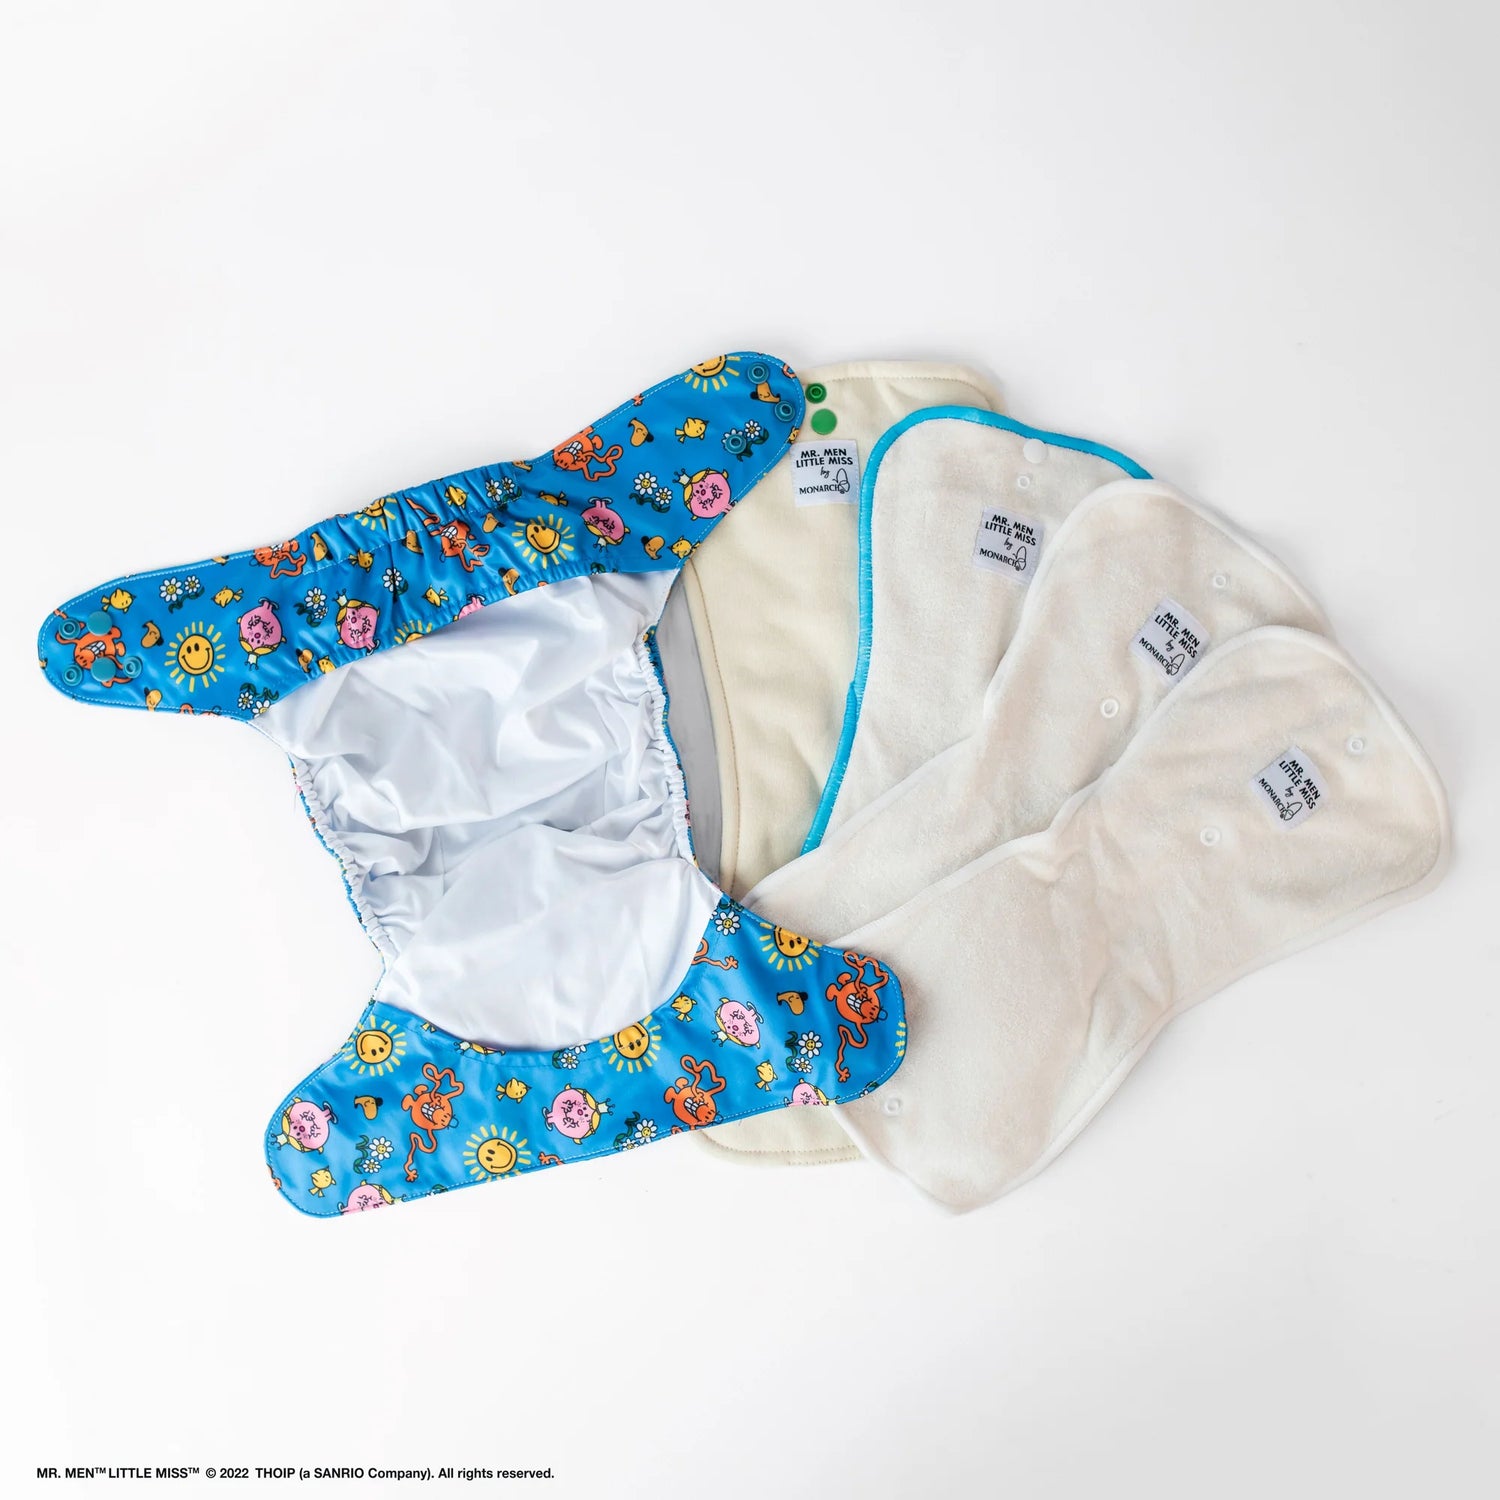 Character print cloth diapers ready to ship miss mr reusable licensed cloth diapers